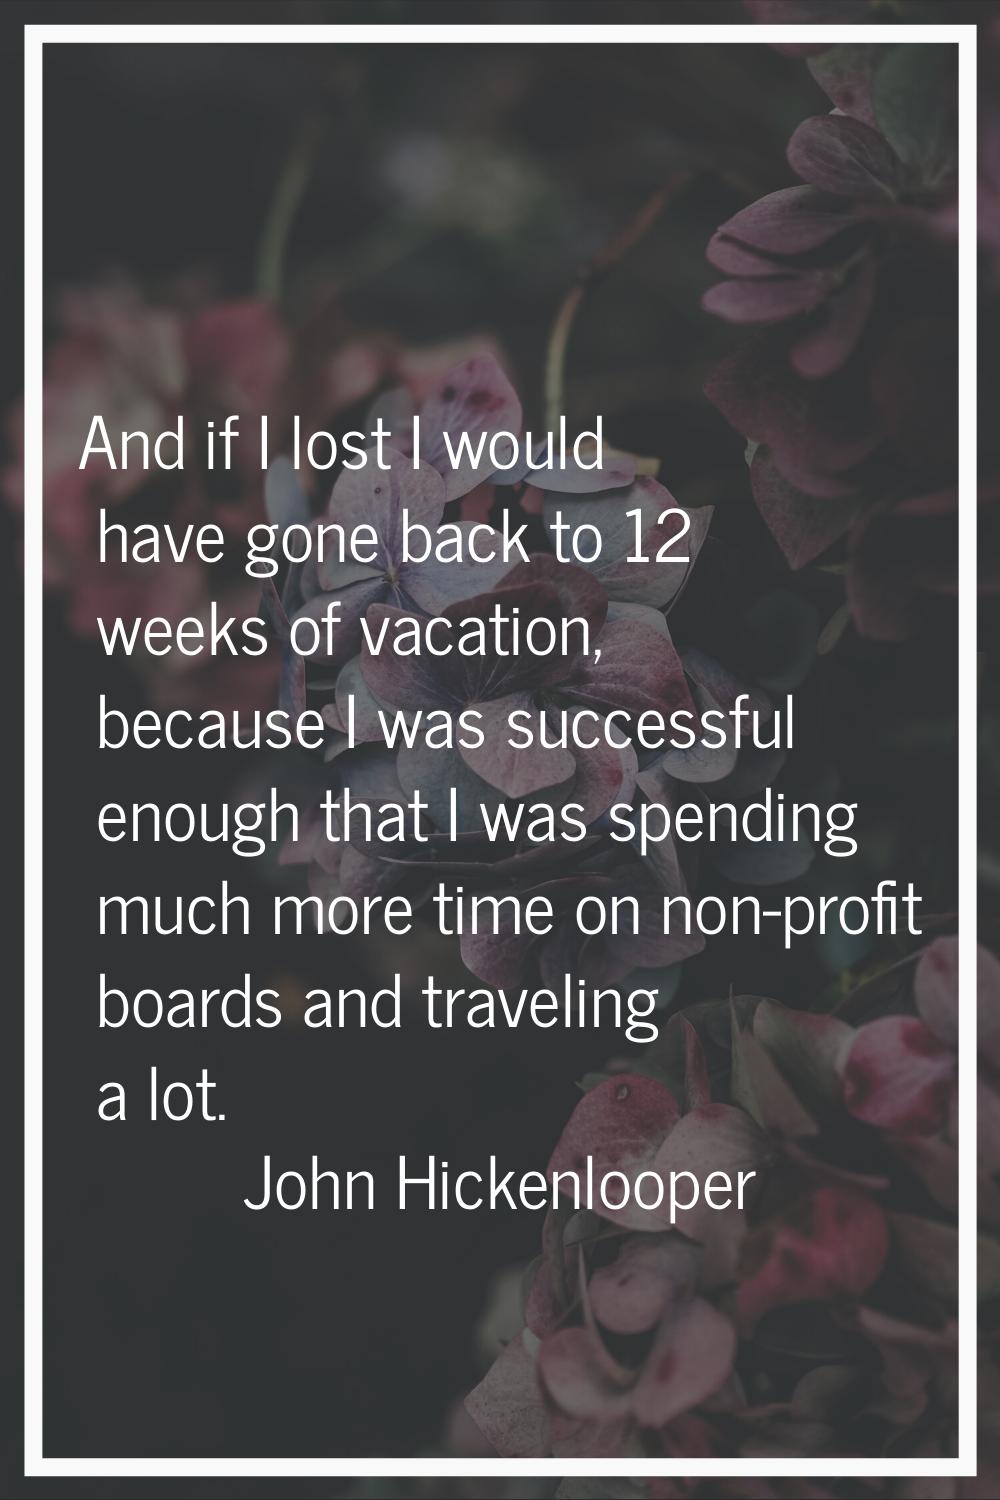 And if I lost I would have gone back to 12 weeks of vacation, because I was successful enough that 